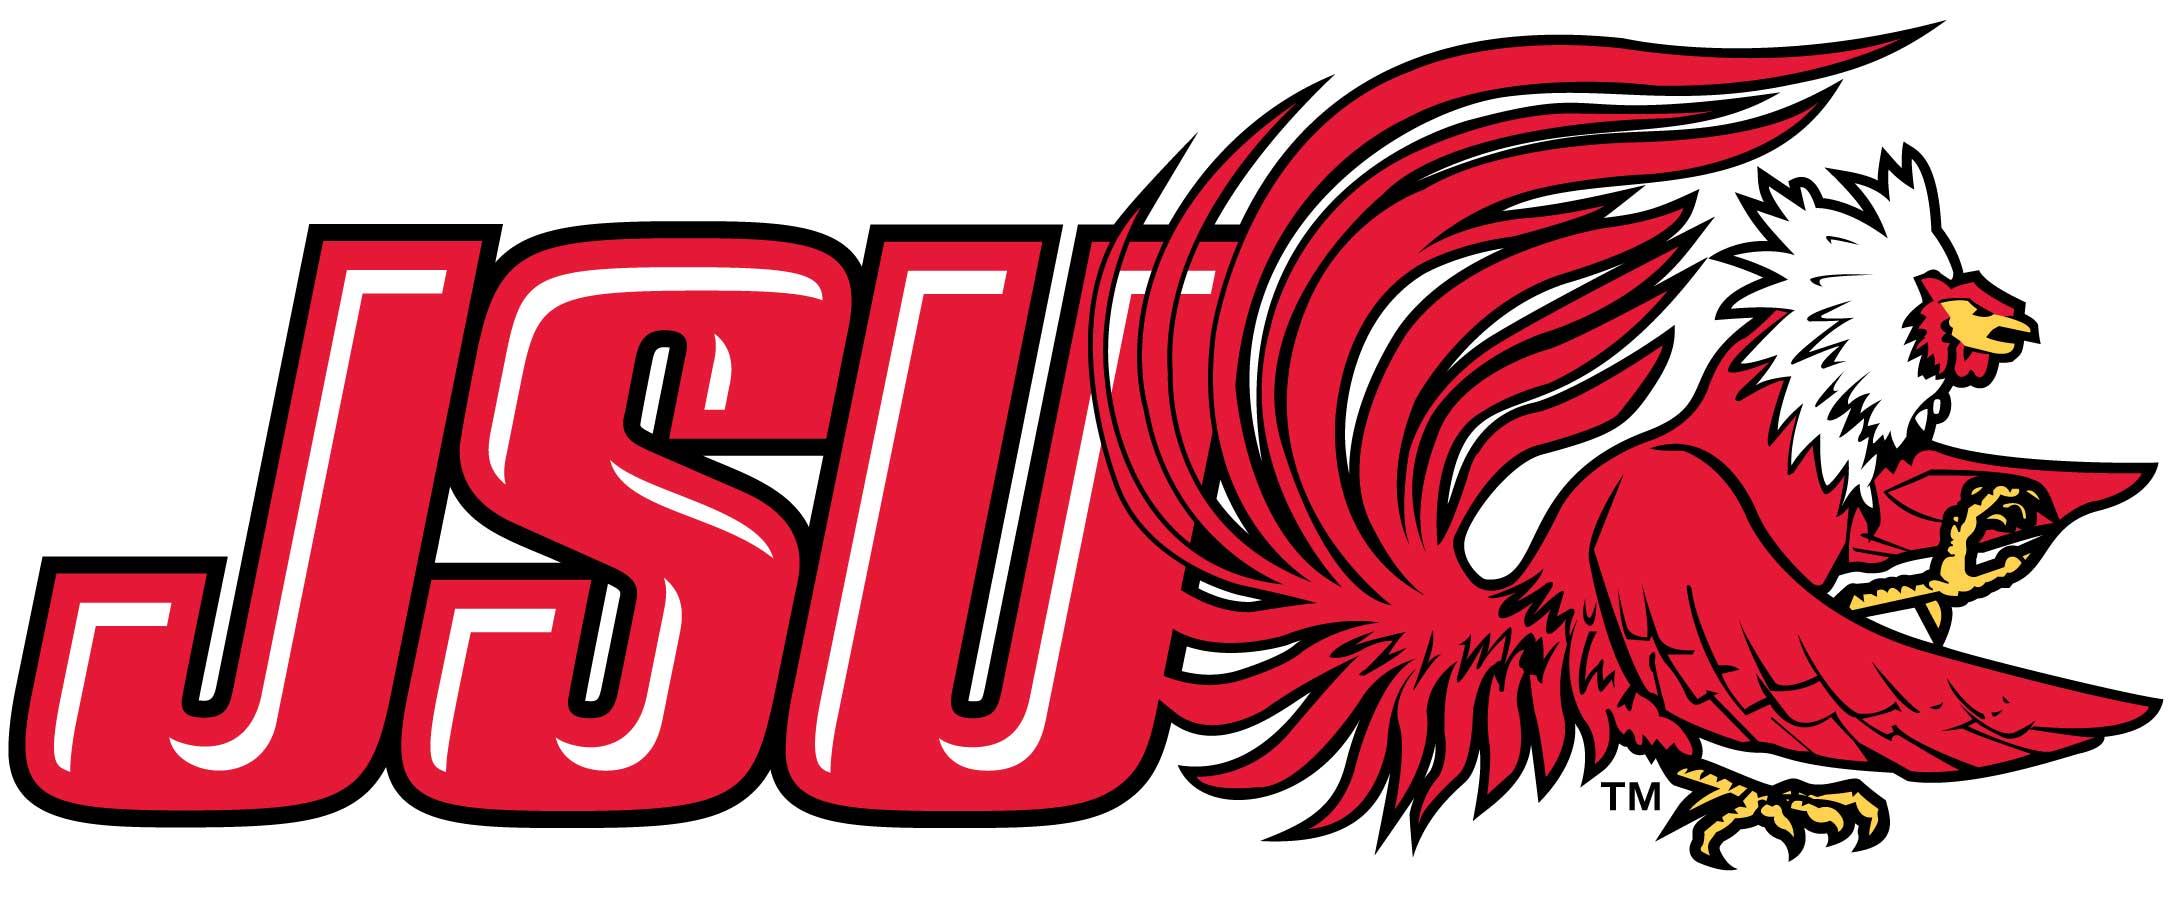 JSU Logo - Jacksonville State Buying Mobile Homes to House Students After ...